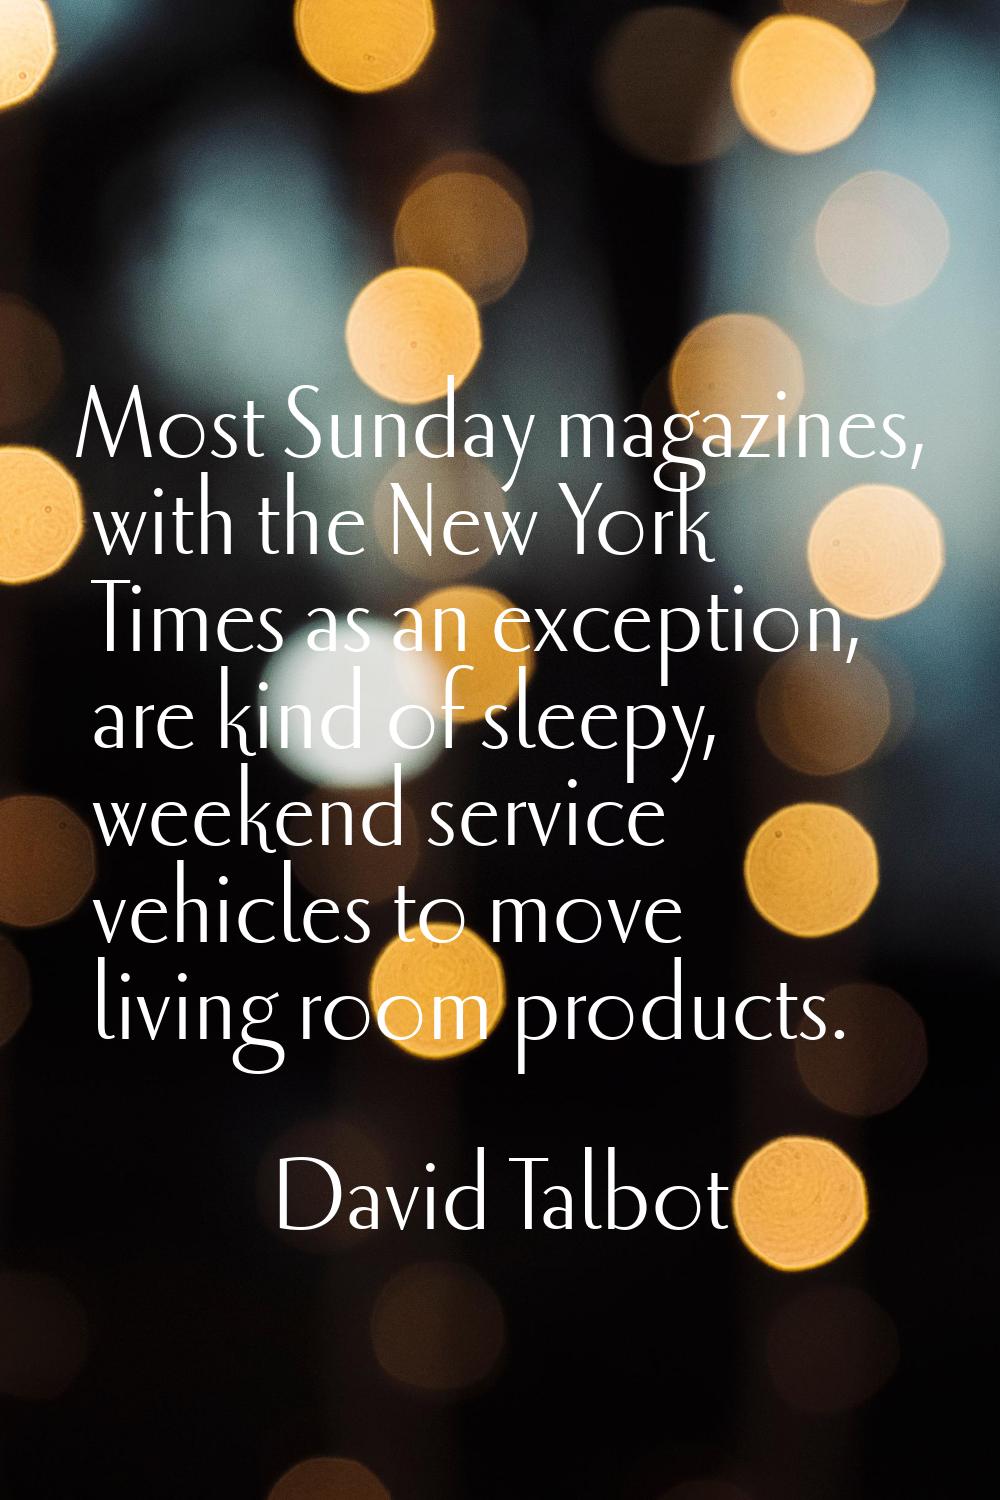 Most Sunday magazines, with the New York Times as an exception, are kind of sleepy, weekend service